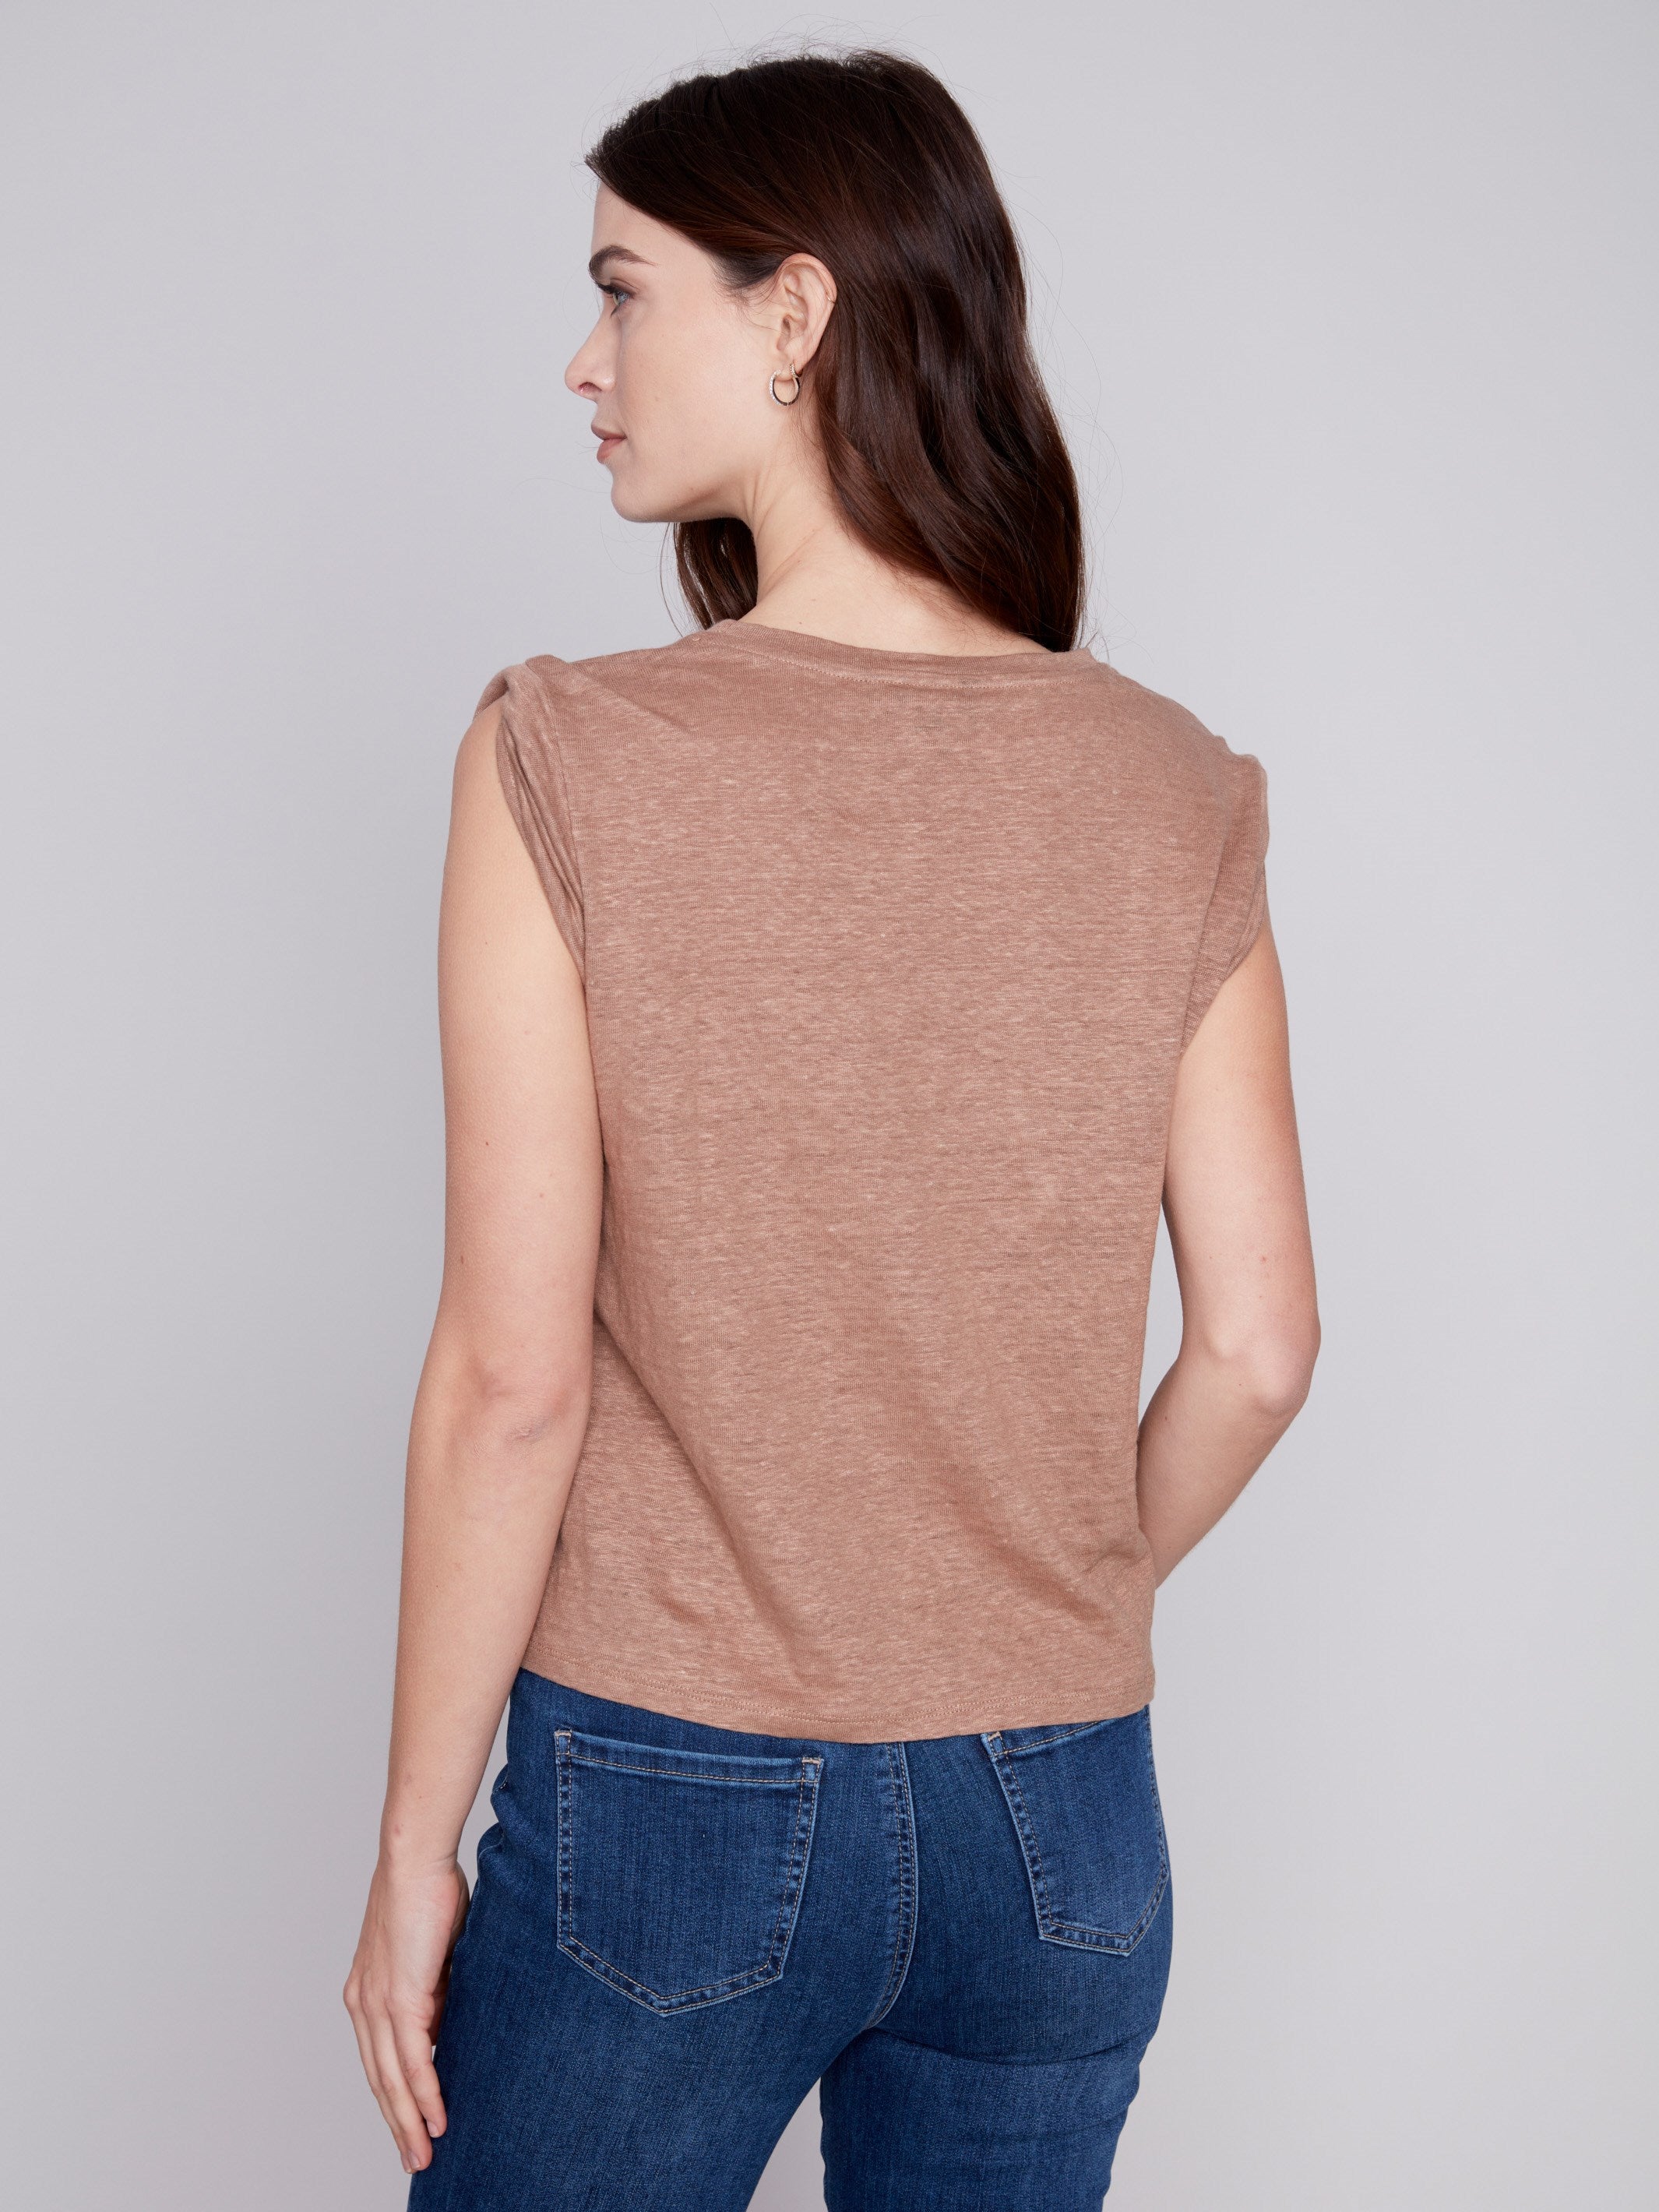 Linen Tank Top with Sleeve Detail - Caramel - Charlie B Collection Canada - Image 7